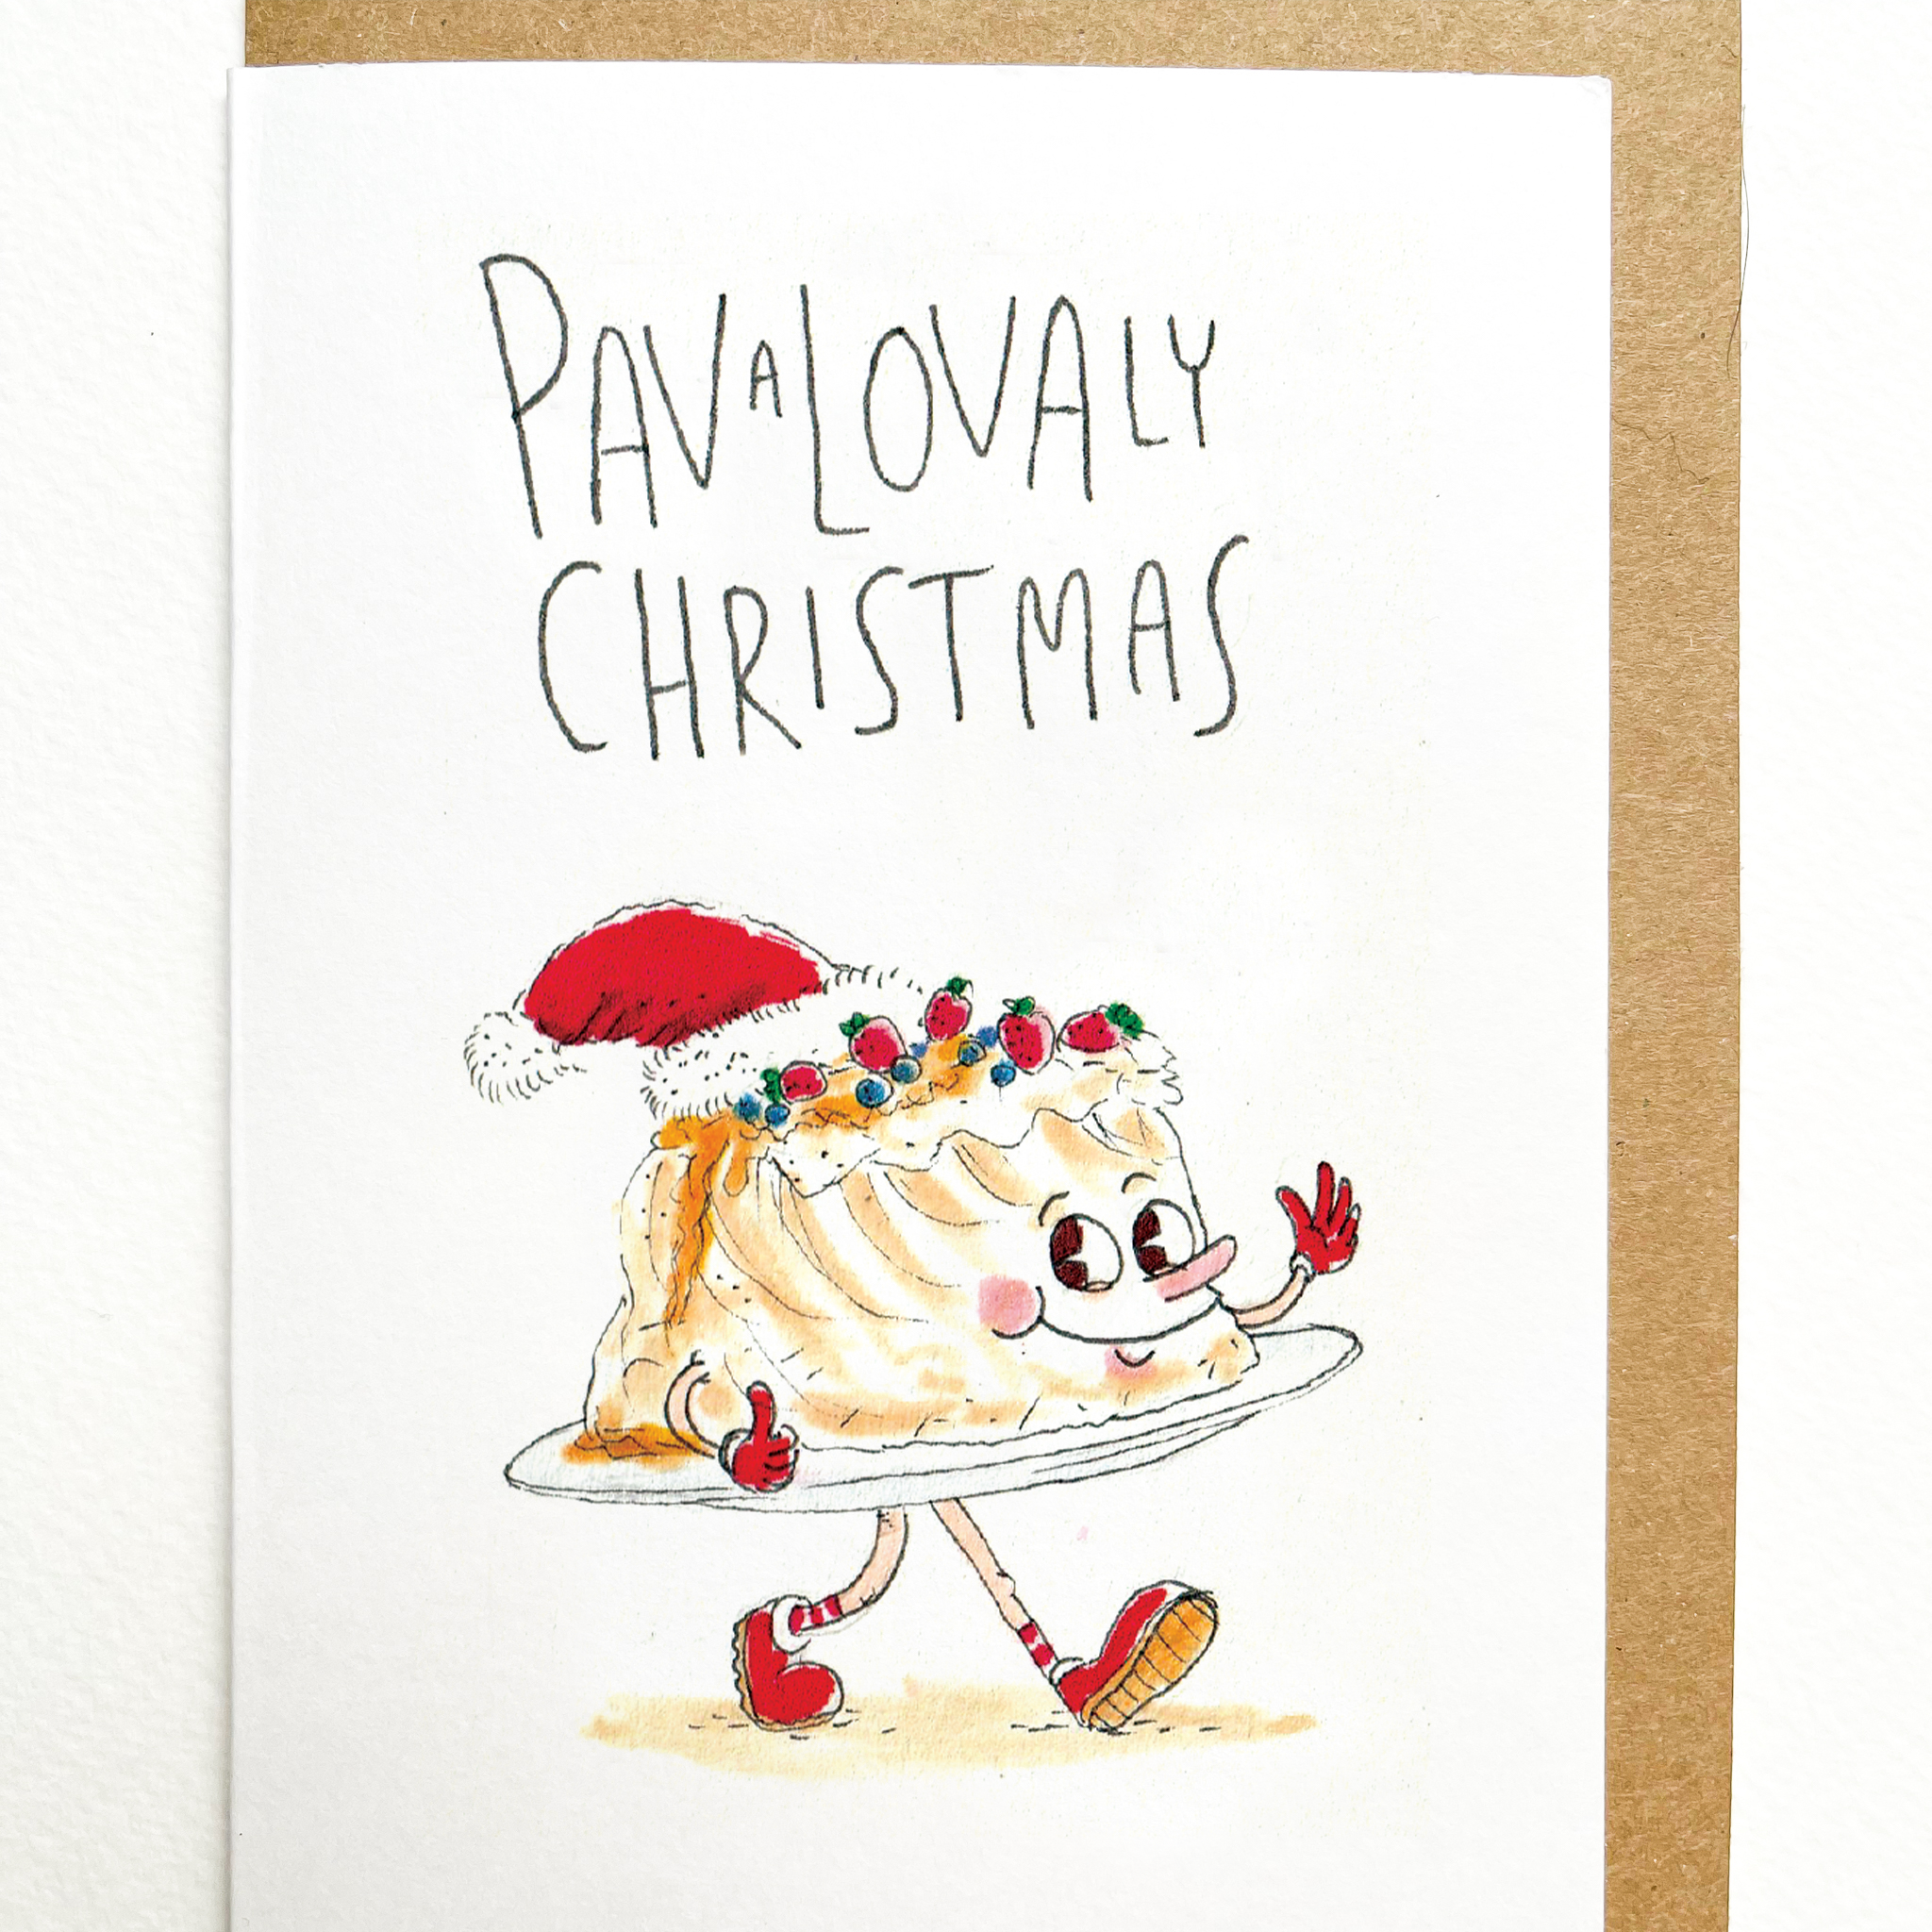 Pavalovely Christmas